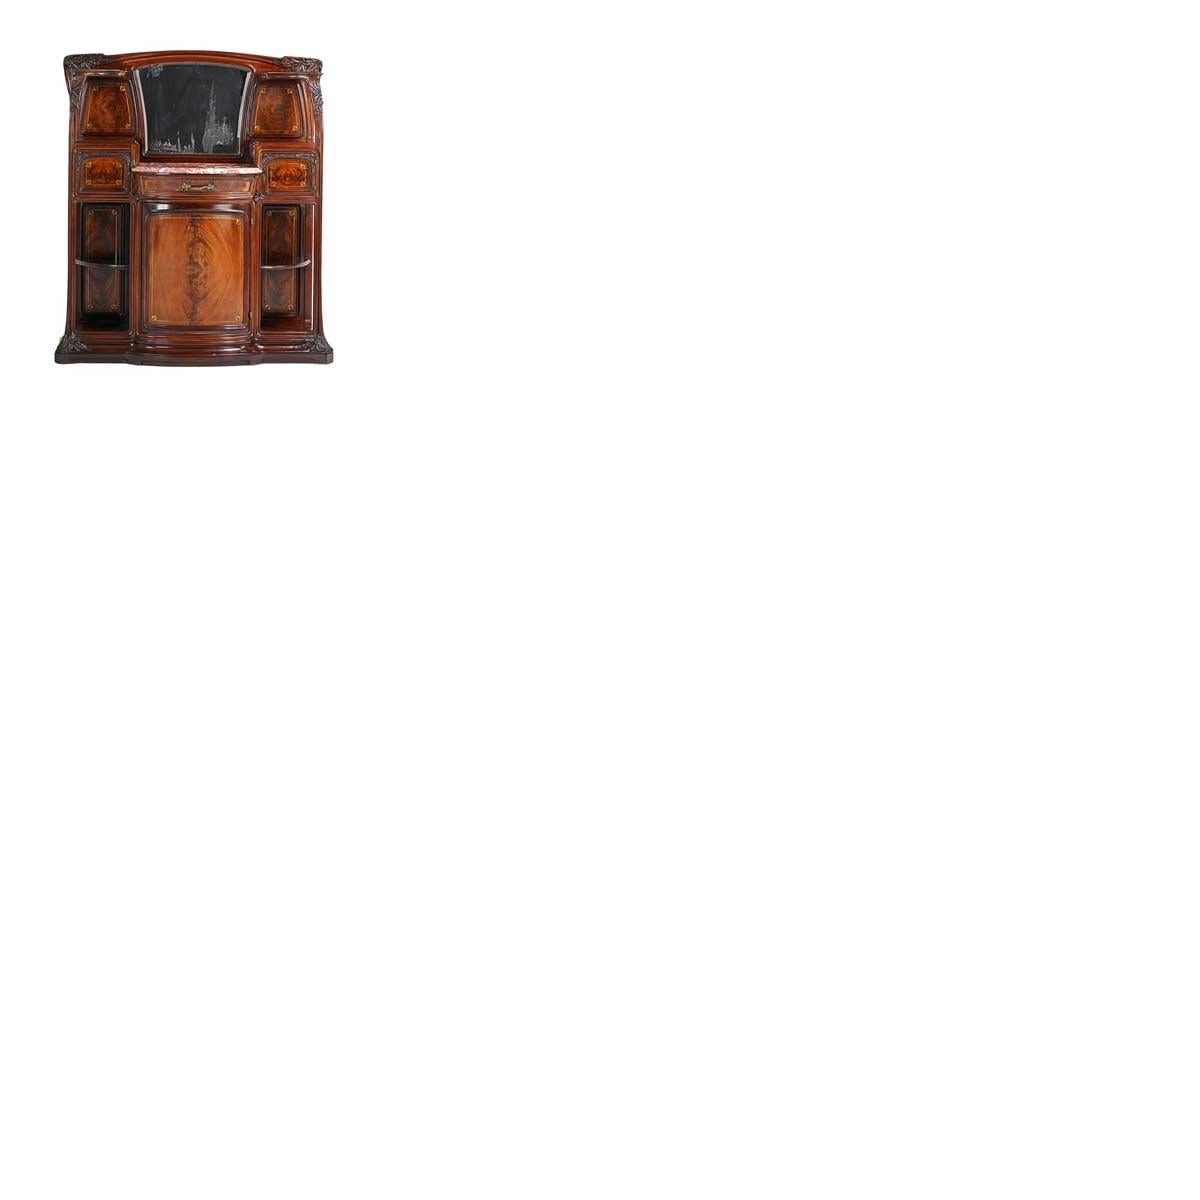 French Camille Gauthier & Paul Poinsignon Mahogany Dining Suite 